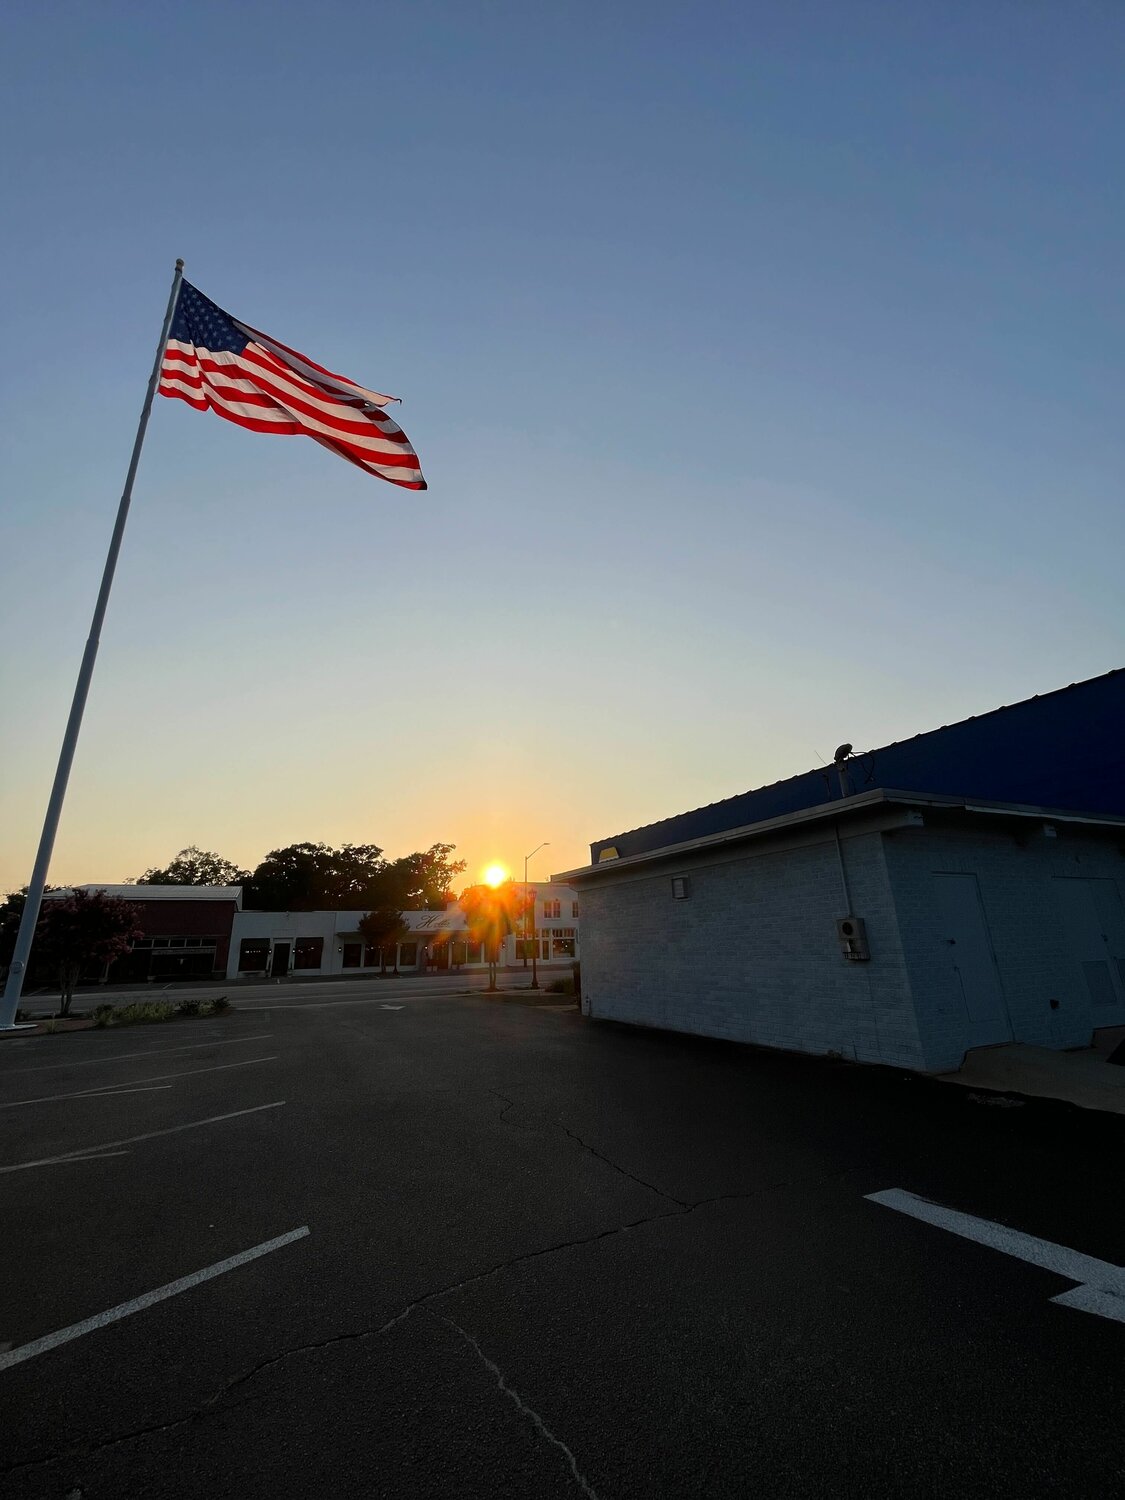 Dunmore said the board will decide on a theme before asking for submissions. At earlier meetings, board members had suggested a patriotic theme to go with the large flag flying from the new 90-foot flagpole at the site